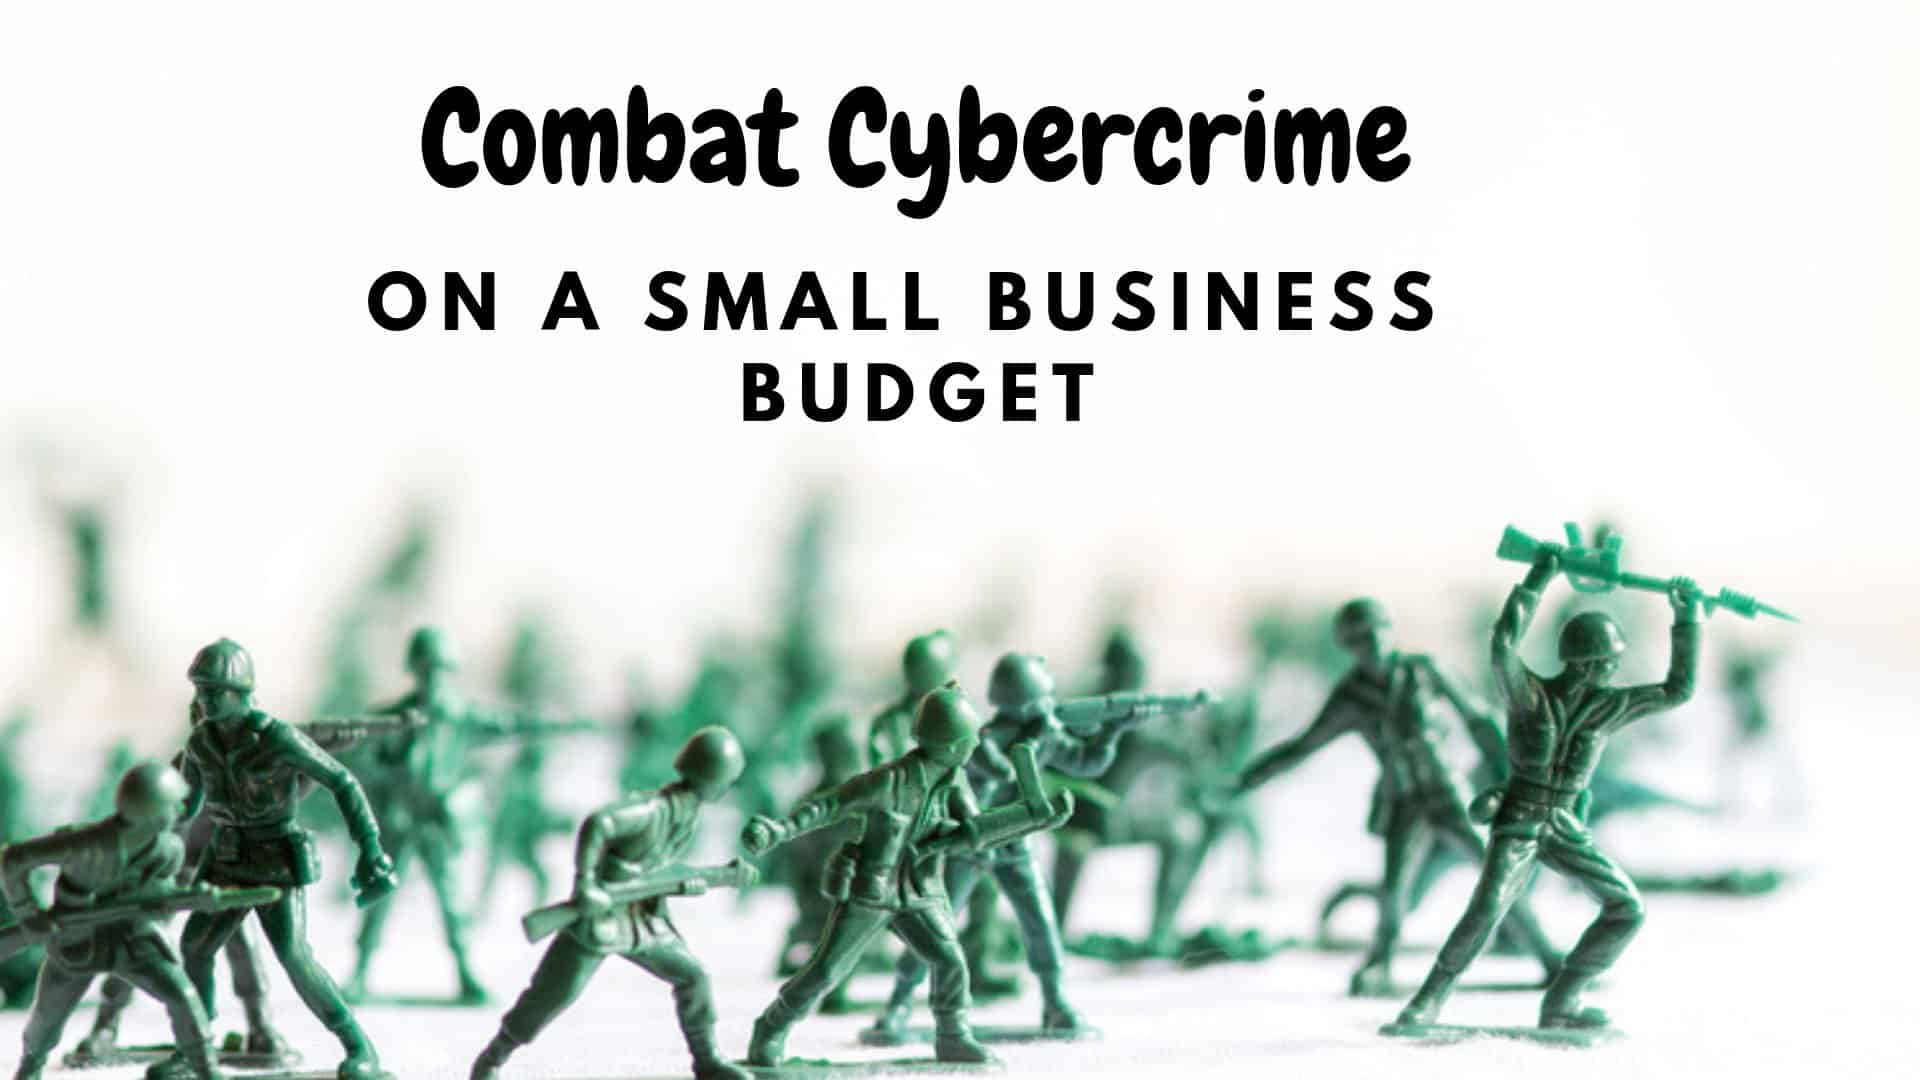 How To Combat Cybercrime On A Small Business Budget?